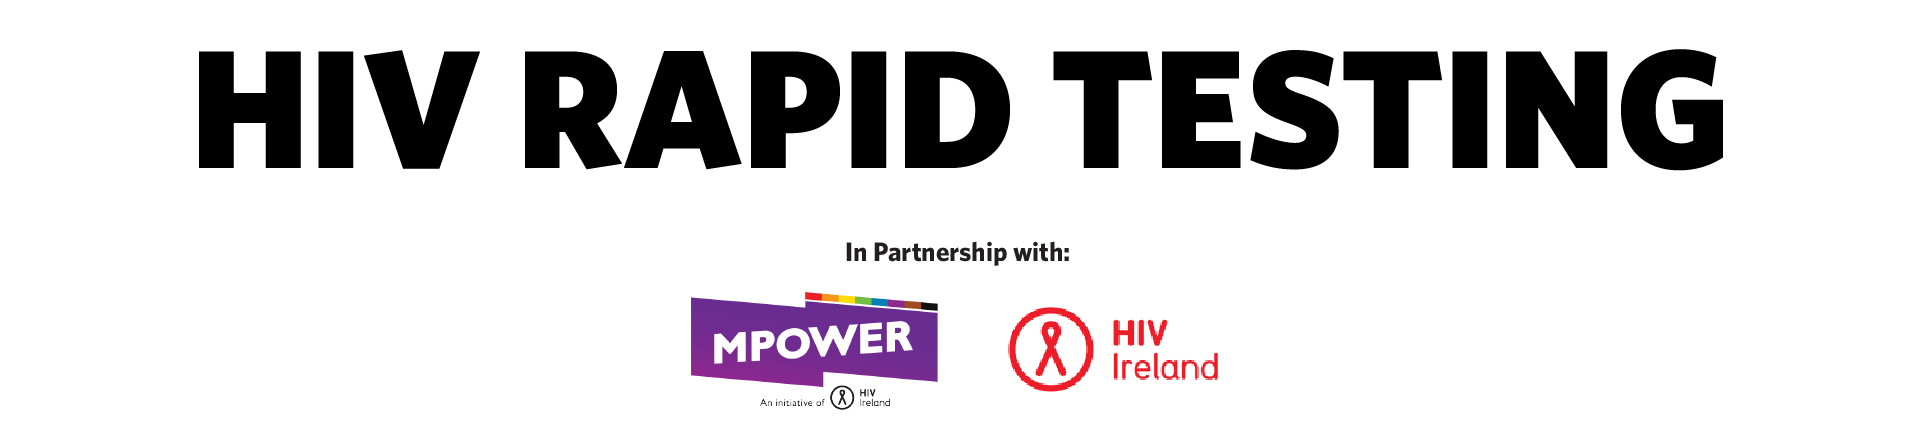 HIV RAPID TESTING. In partnership with MPOWER and HIV IRELAND